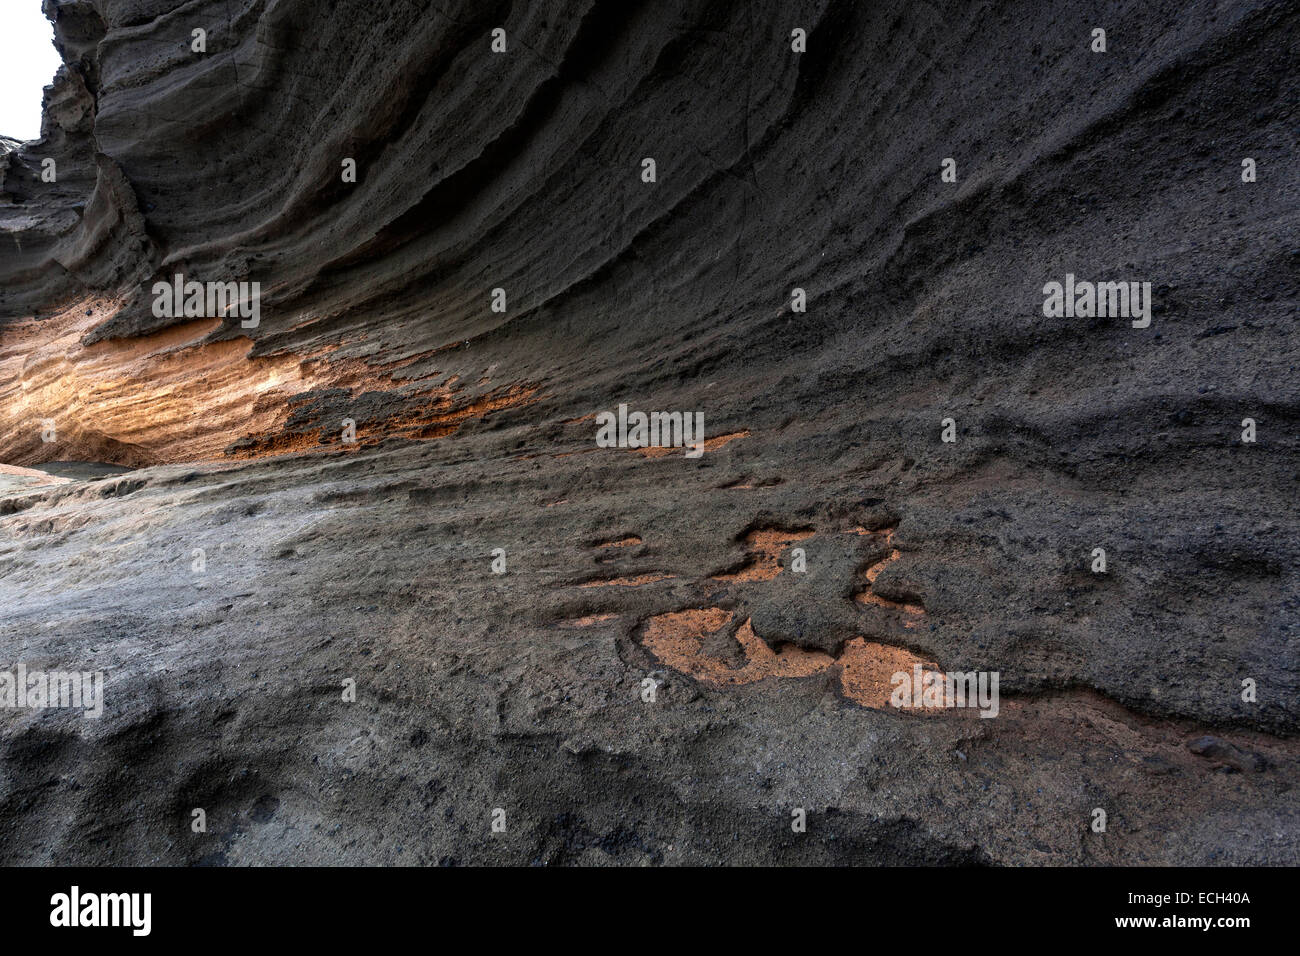 Volcanic rock in the El Golfo volcanic crater, Lanzarote, Canary Islands, Spain Stock Photo